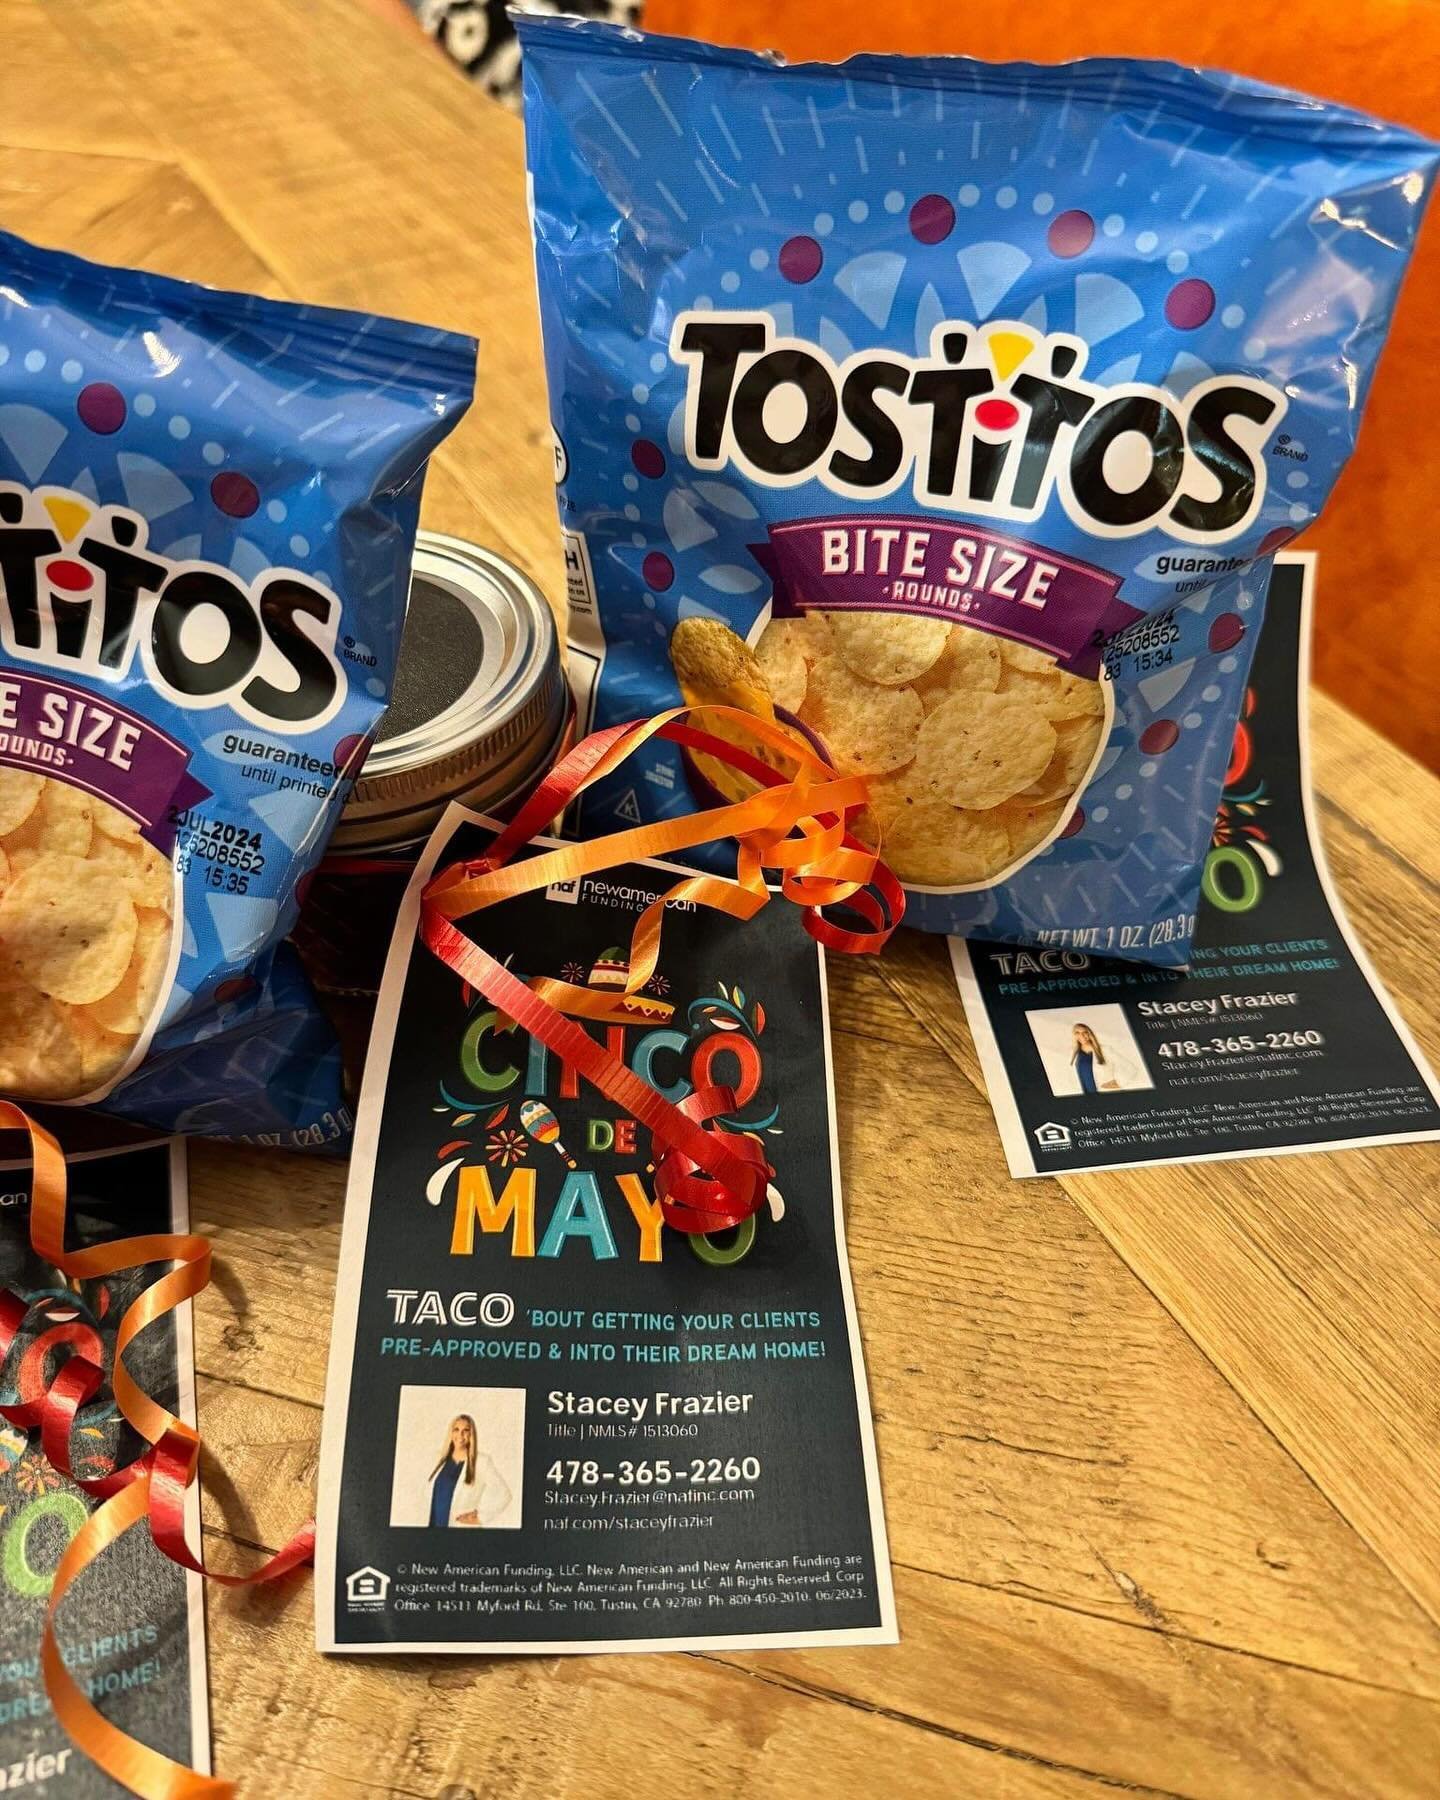 What a nice surprise at the office today! Thank you Stacey Stewart Frazier for the chips and salsa!.. 🌮

We always love doing business with you! 

#lender #locallender #chipsandsalsa #cincodemayo #smallbusiness #gilesrealty #yourrealestaterootsstart